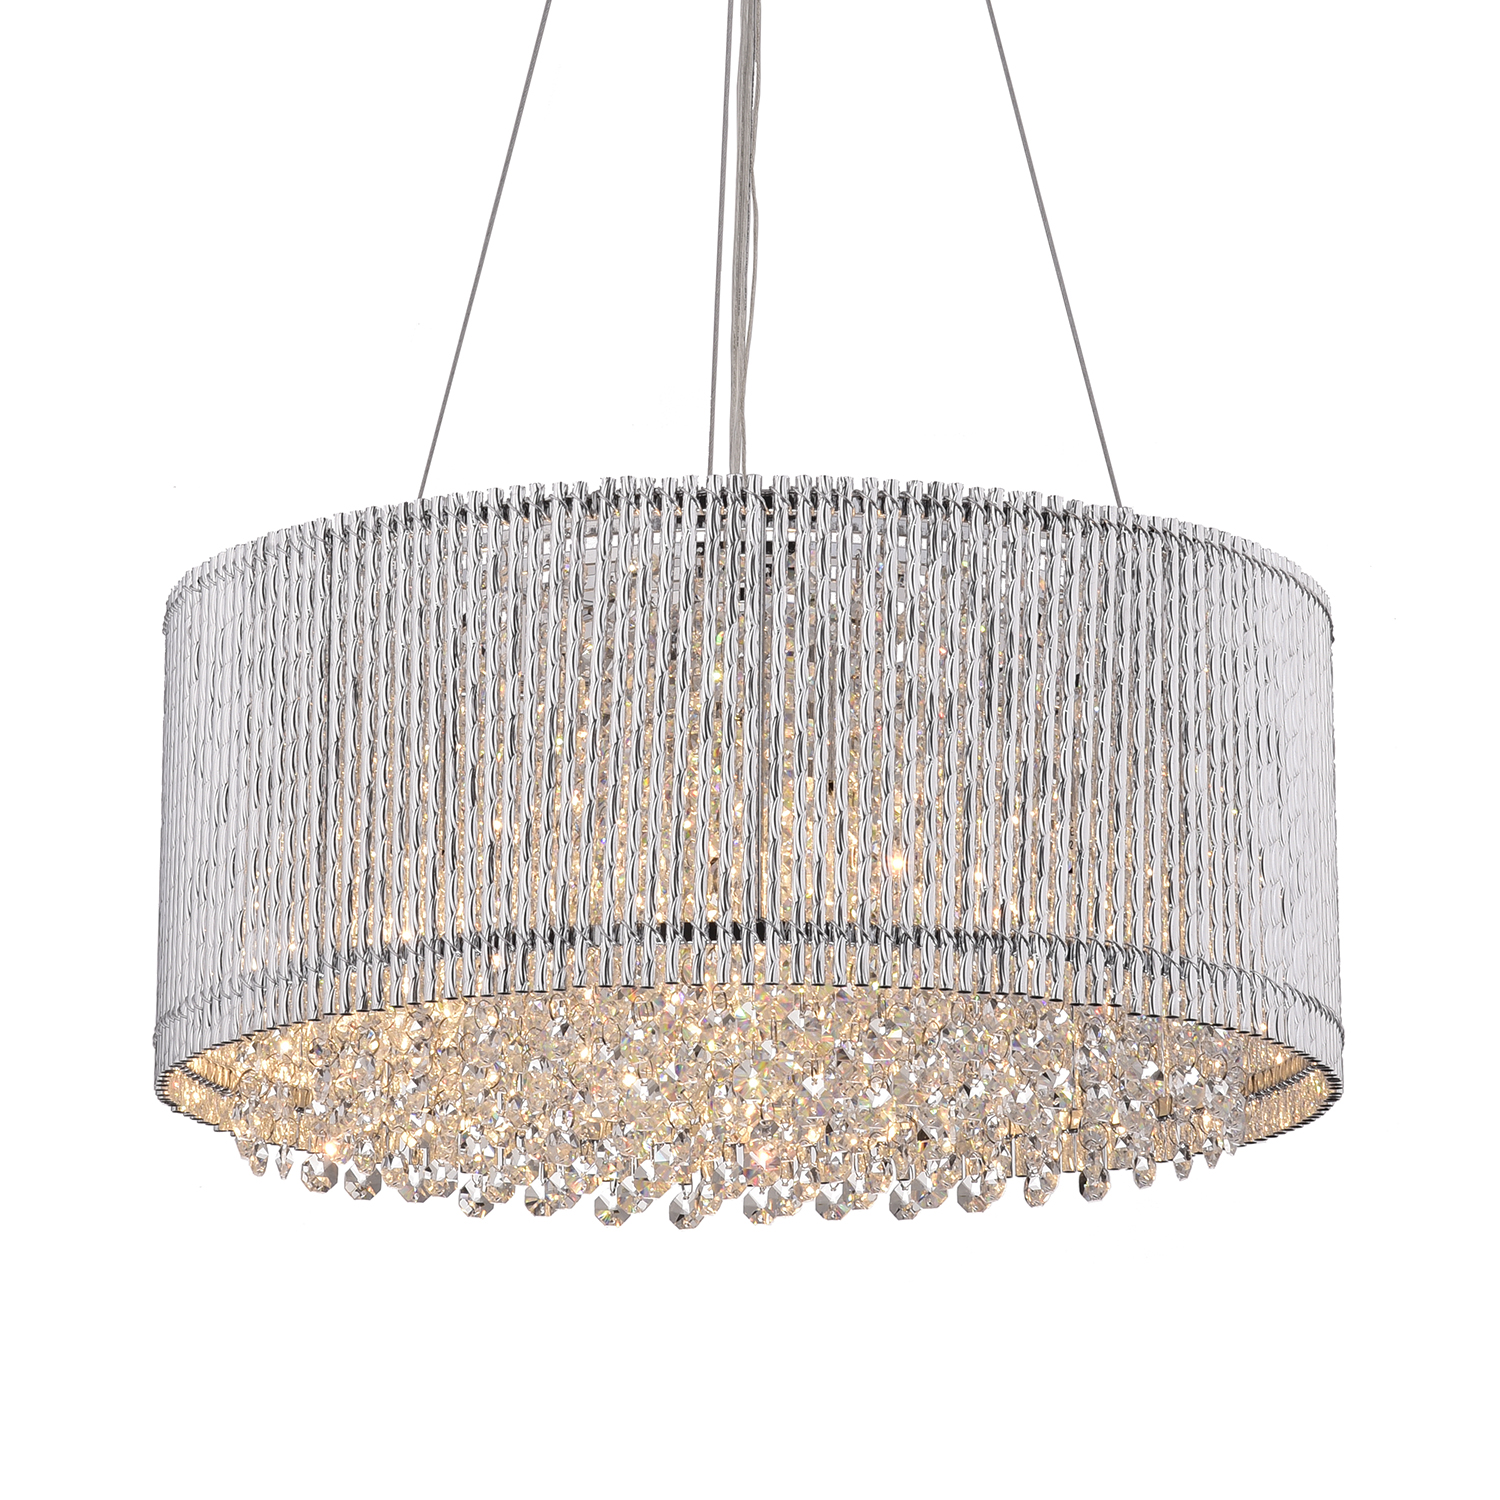 Pamina 4-Light Chrome Tubes Drum Shade Chandelier with Hanging 